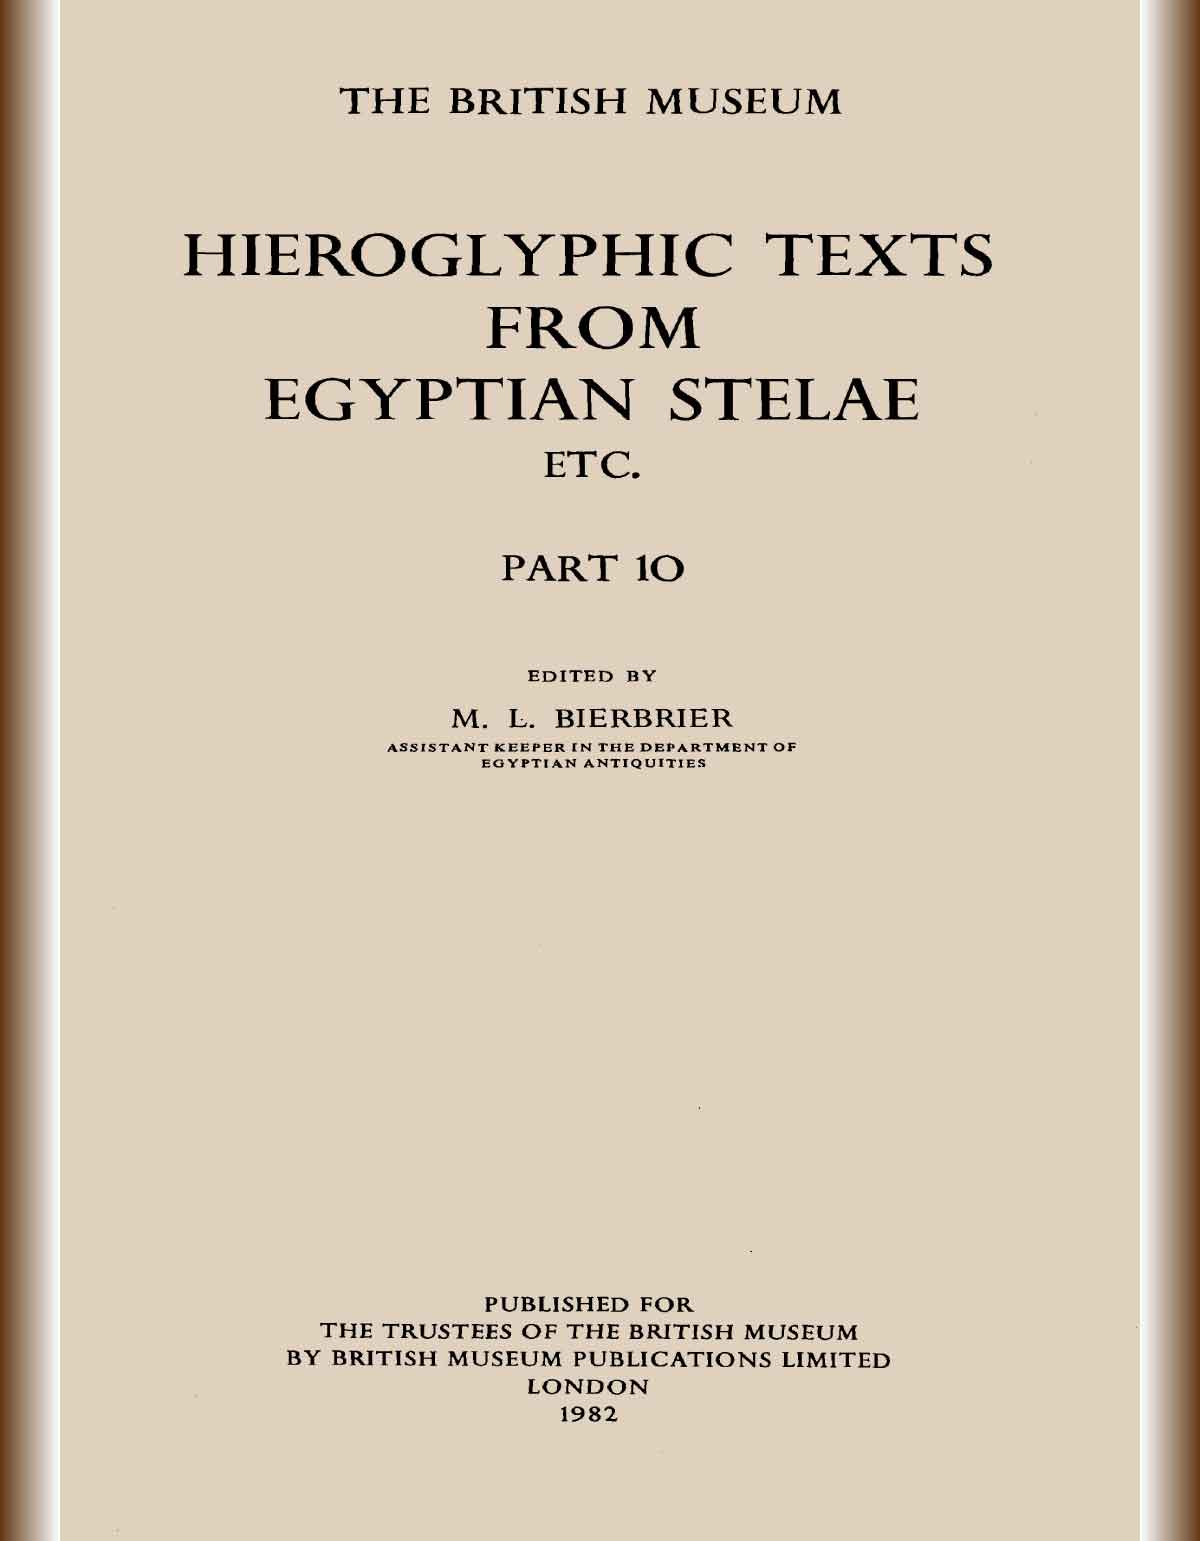 Hieroglyphic texts from Egyptian stelae etc. Part 10-cover